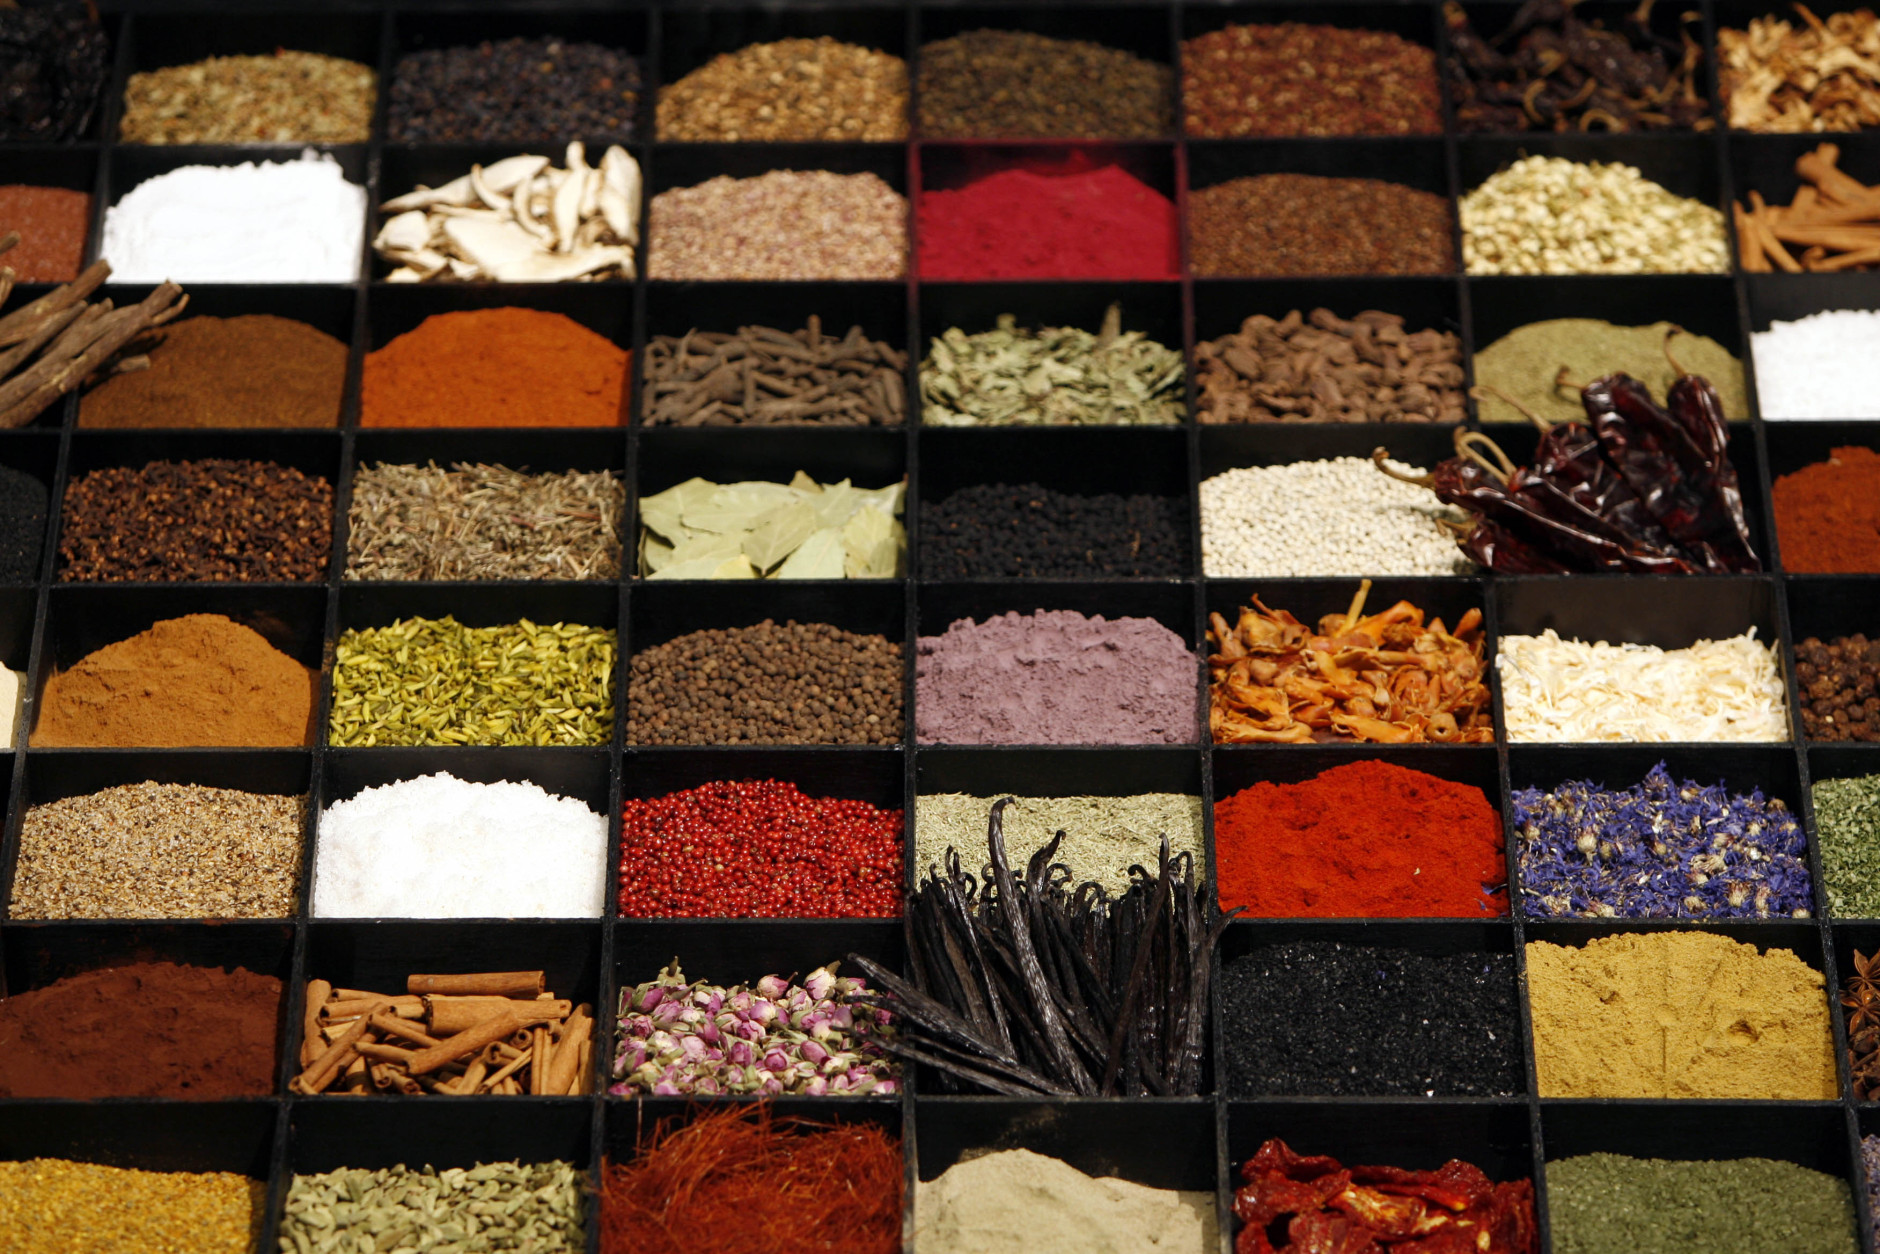 **FOR USE WITH AP WEEKLY  FEATURES**   A display of spices lends color to a section of the Fancy Food Show, Tuesday, July 11, 2006, in New York City. (AP Photo/Seth Wenig)